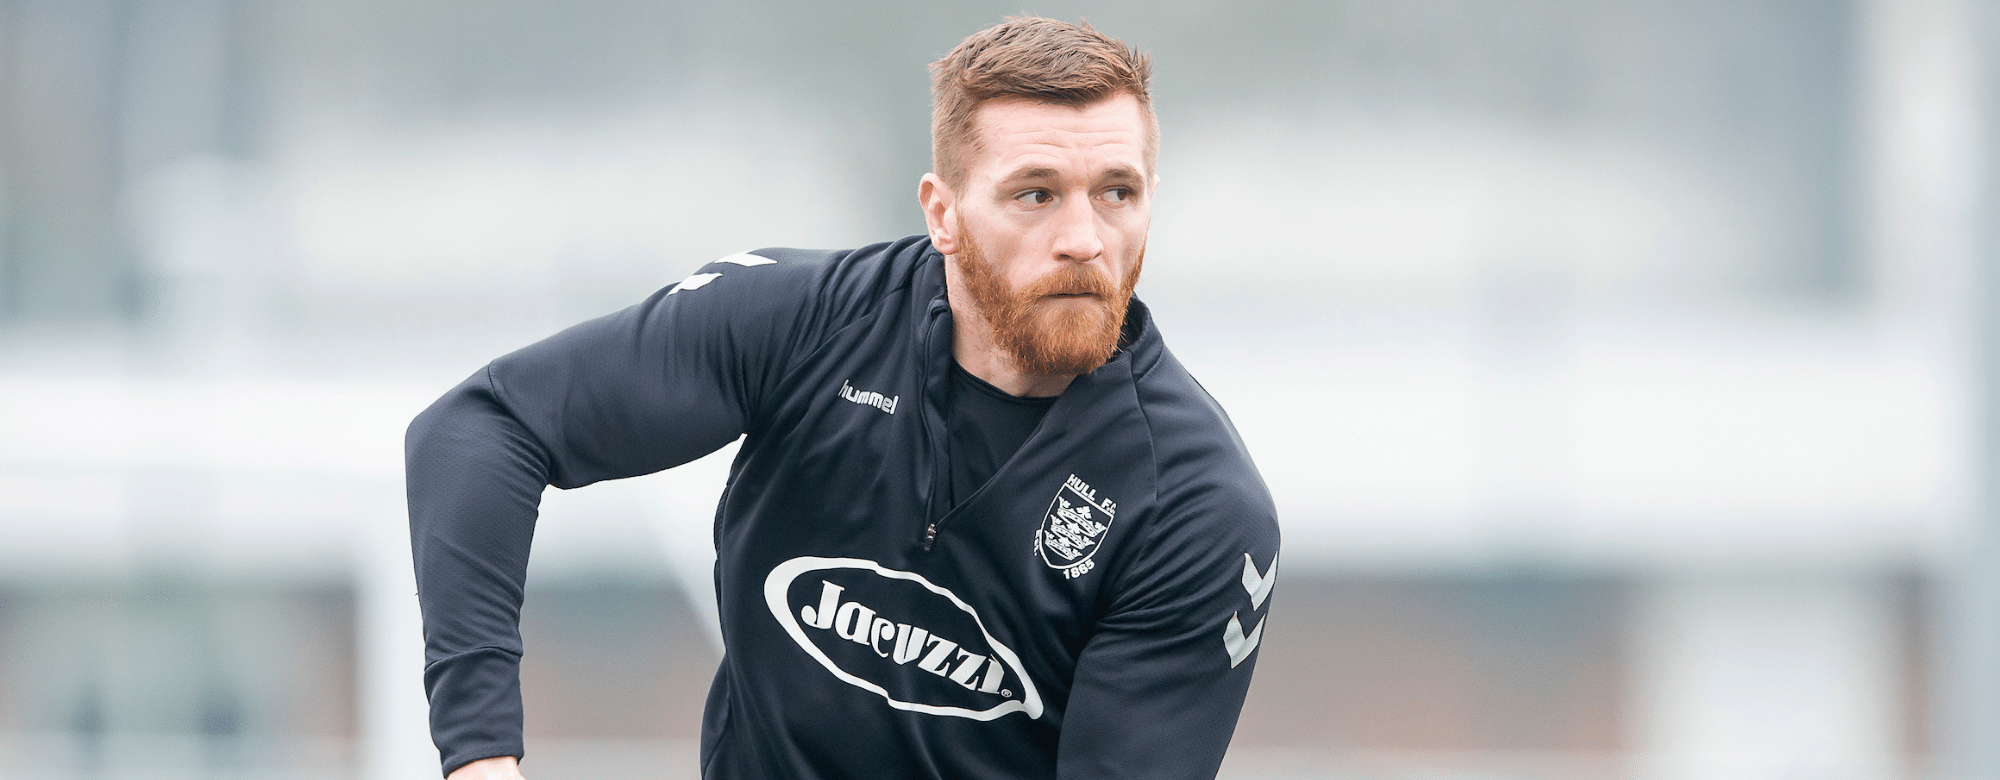 Sneyd Gives Insight Into New Partnership With Reynolds